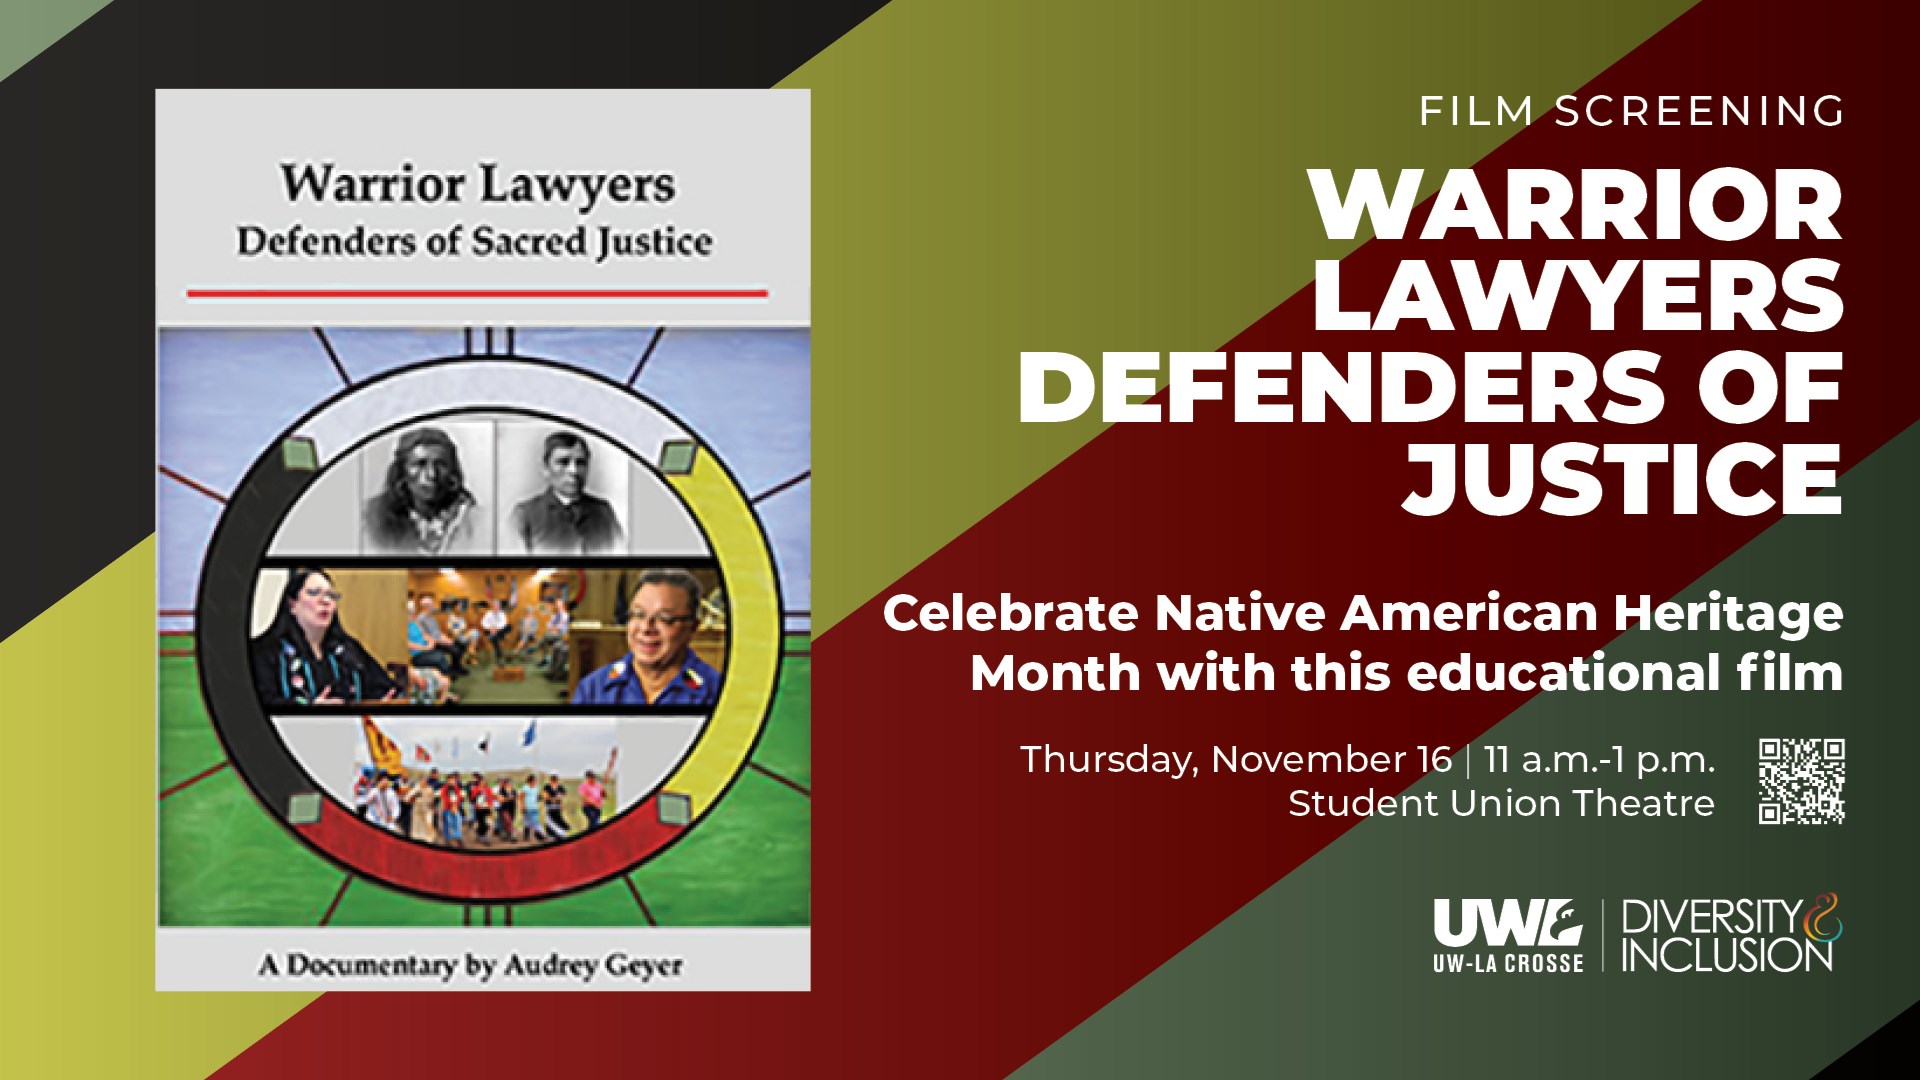 Event image for Film Screening of Emmy award winning: Warrior Lawyers Defenders of Justice